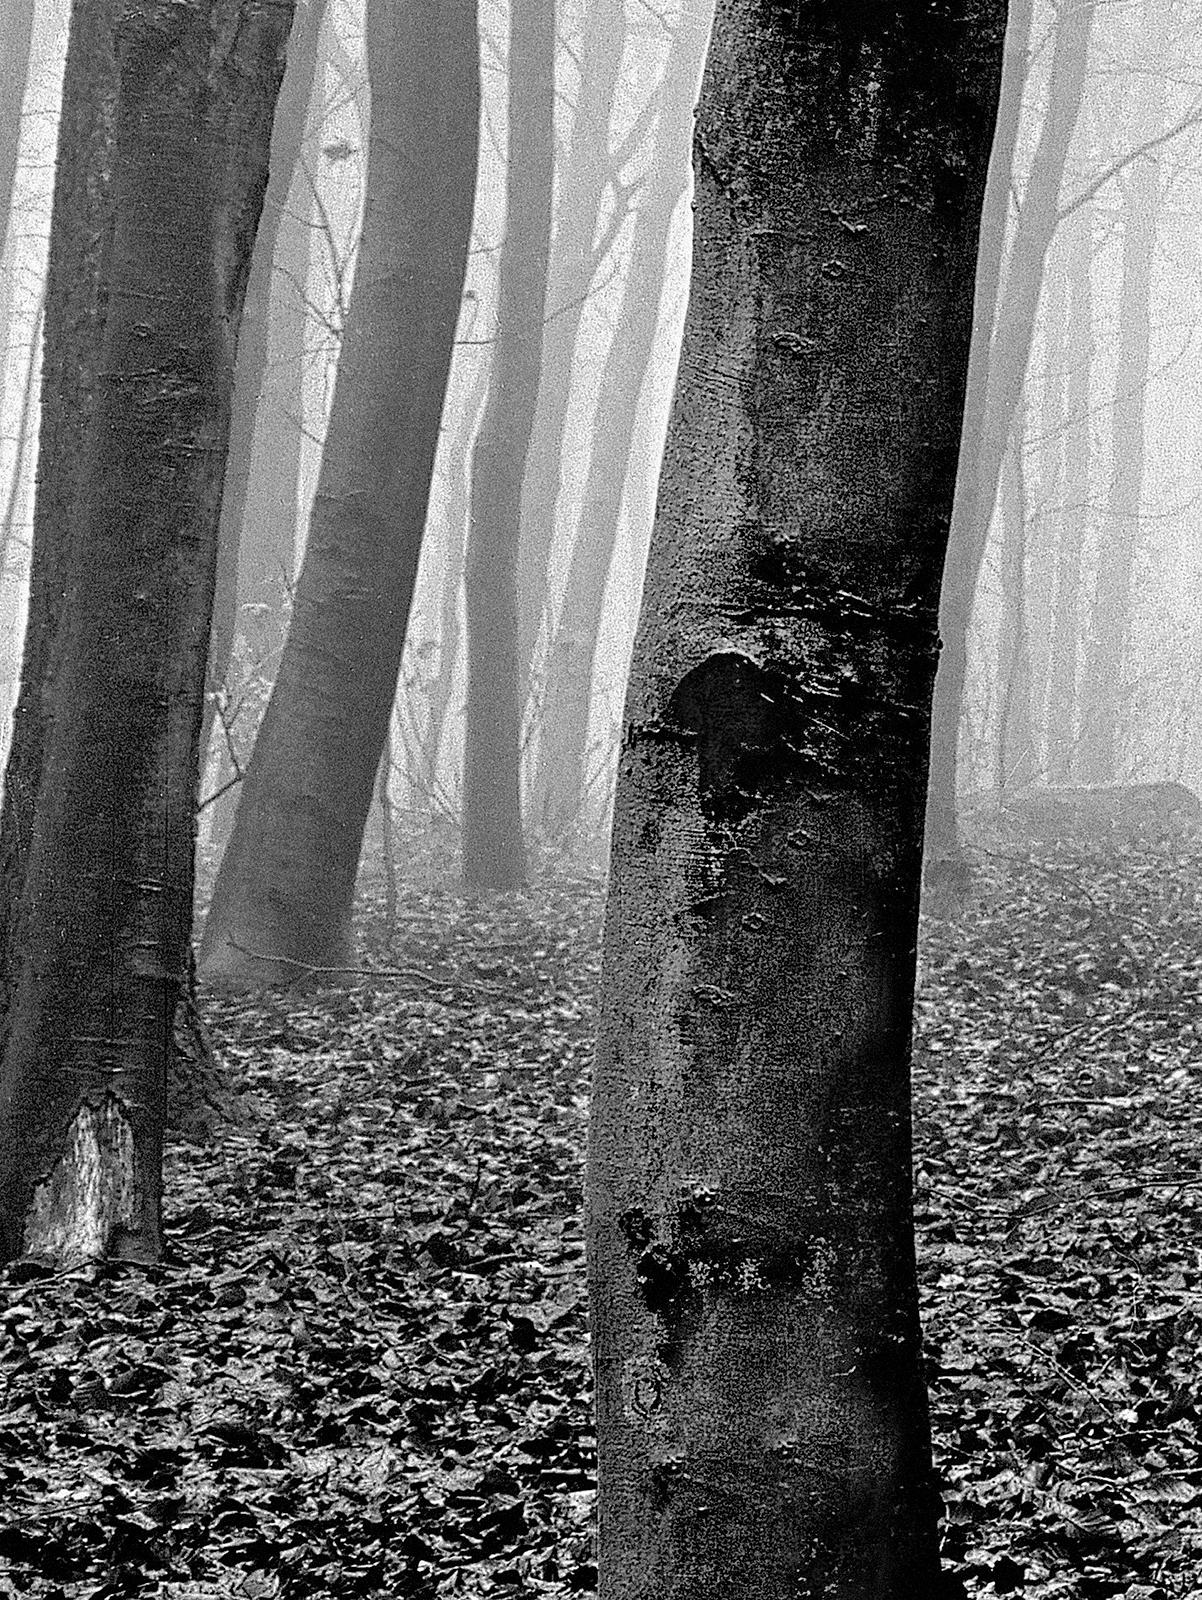  Wood  - Signed limited edition archival pigment print, 1981   -  Edition of 5

This image was captured on film. The negative was scanned creating a digital file which was then printed on Hahnemühle Photo Rag® Baryta 315 gsm (Acid- and lignin-free